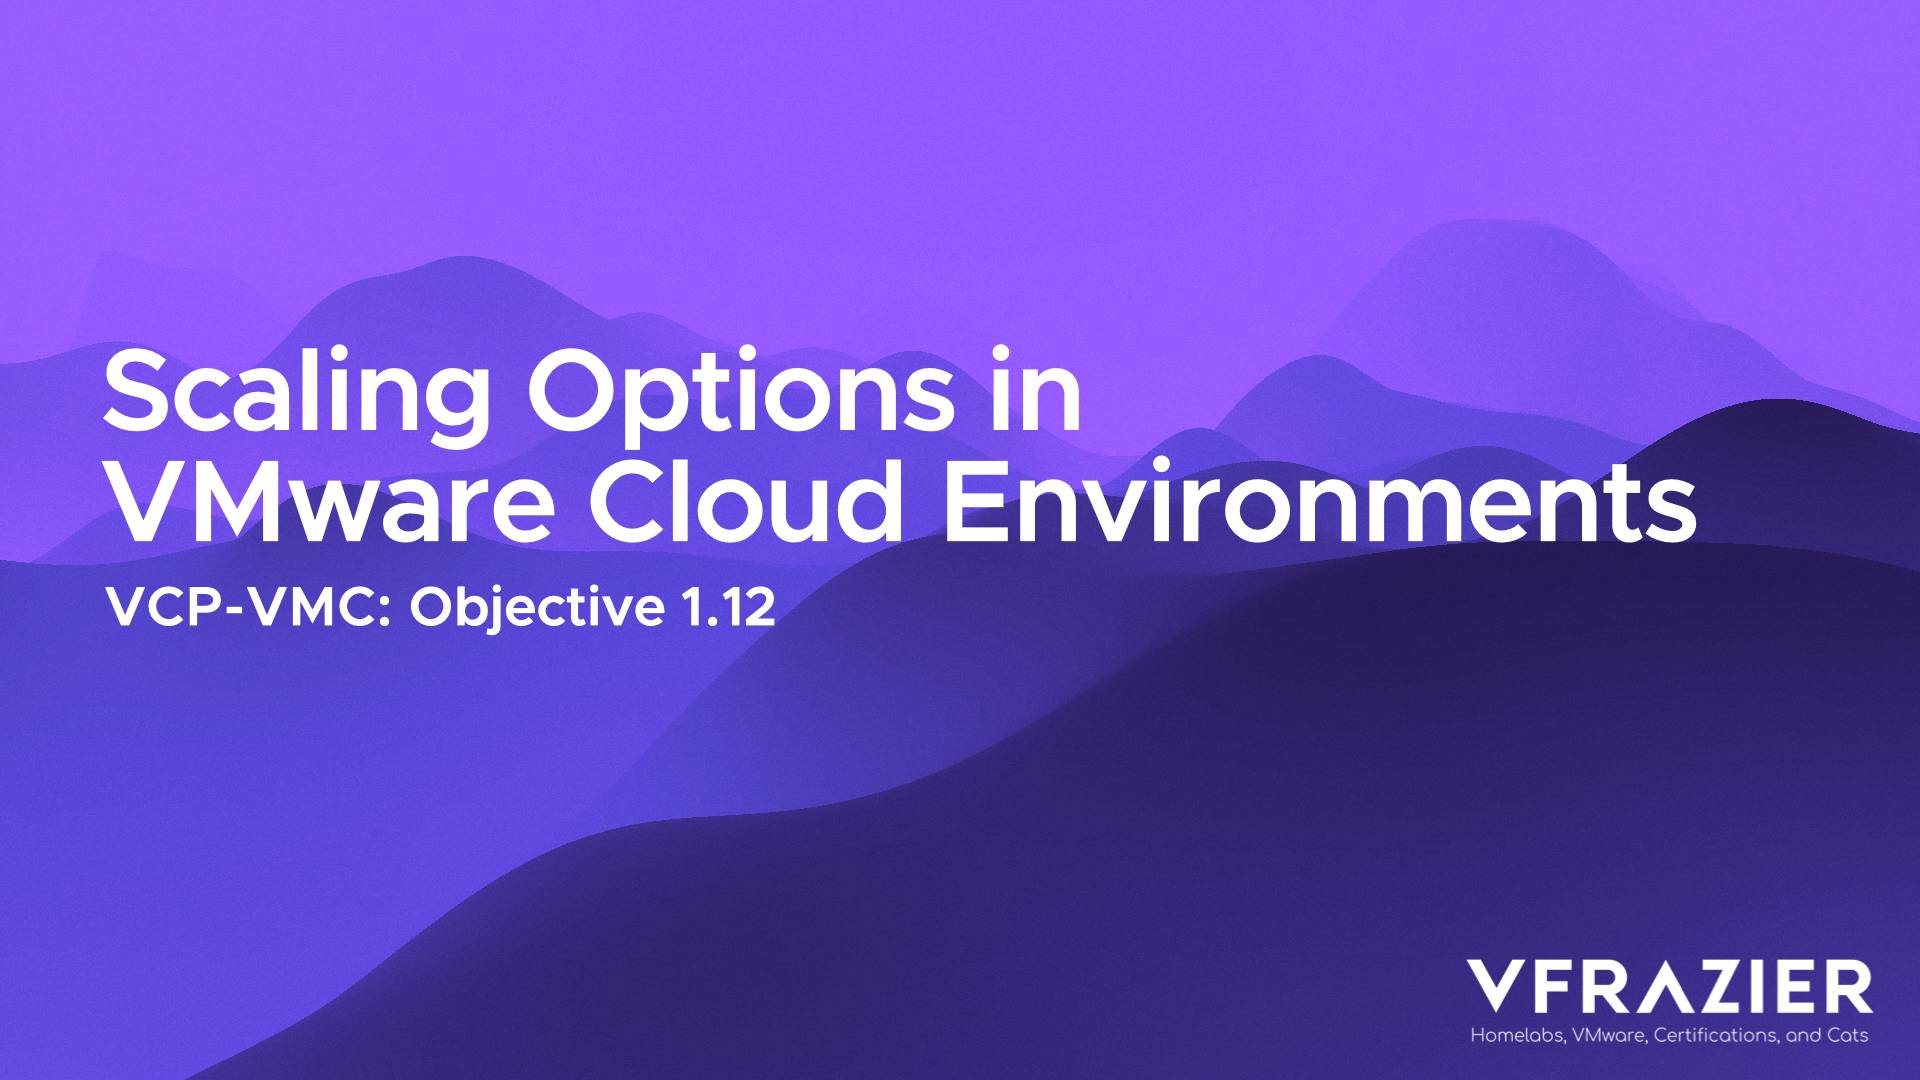 VCP-VMC 1.15: Describe use cases for VMware Cloud on Dell EMC and VMware Cloud on AWS Outposts